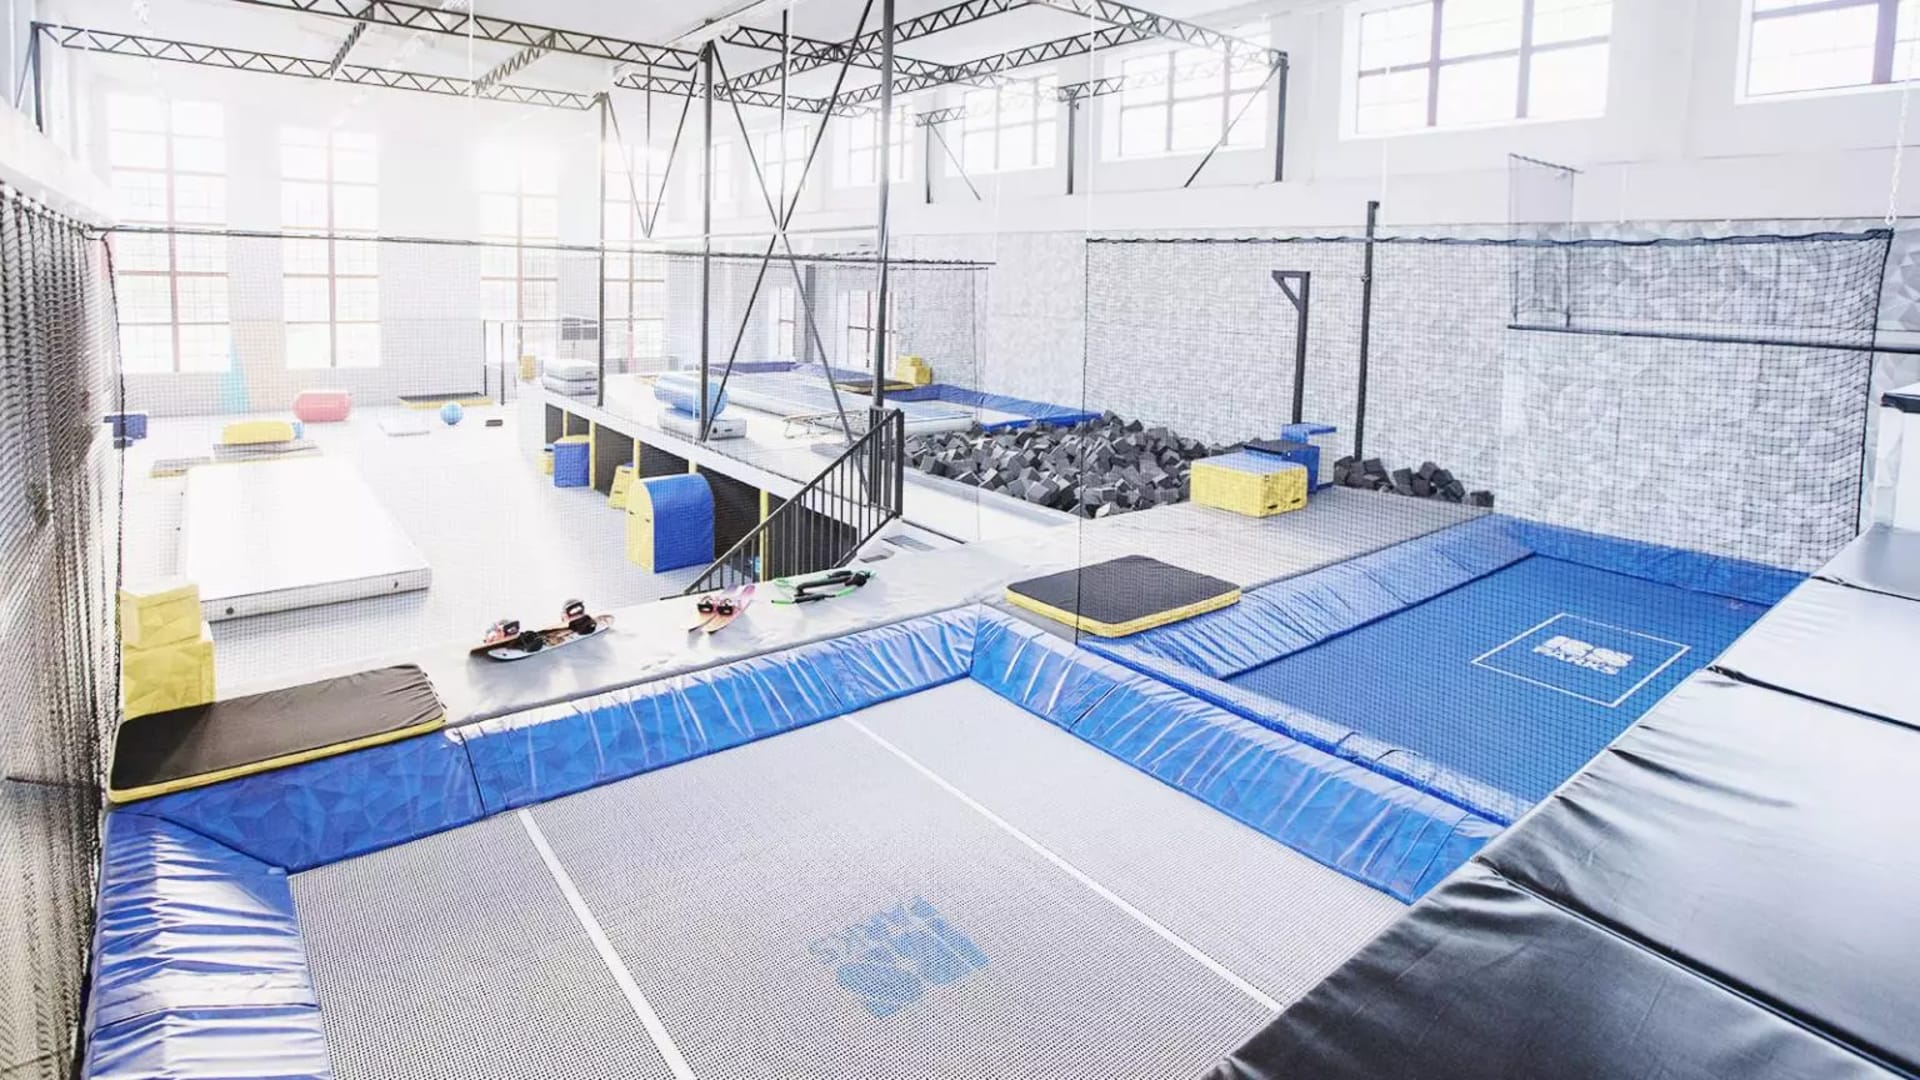 Reenis is a creative gym for versatile training. With us, you train purposefully in the gym and develop coordination and have fun on the trampolines.